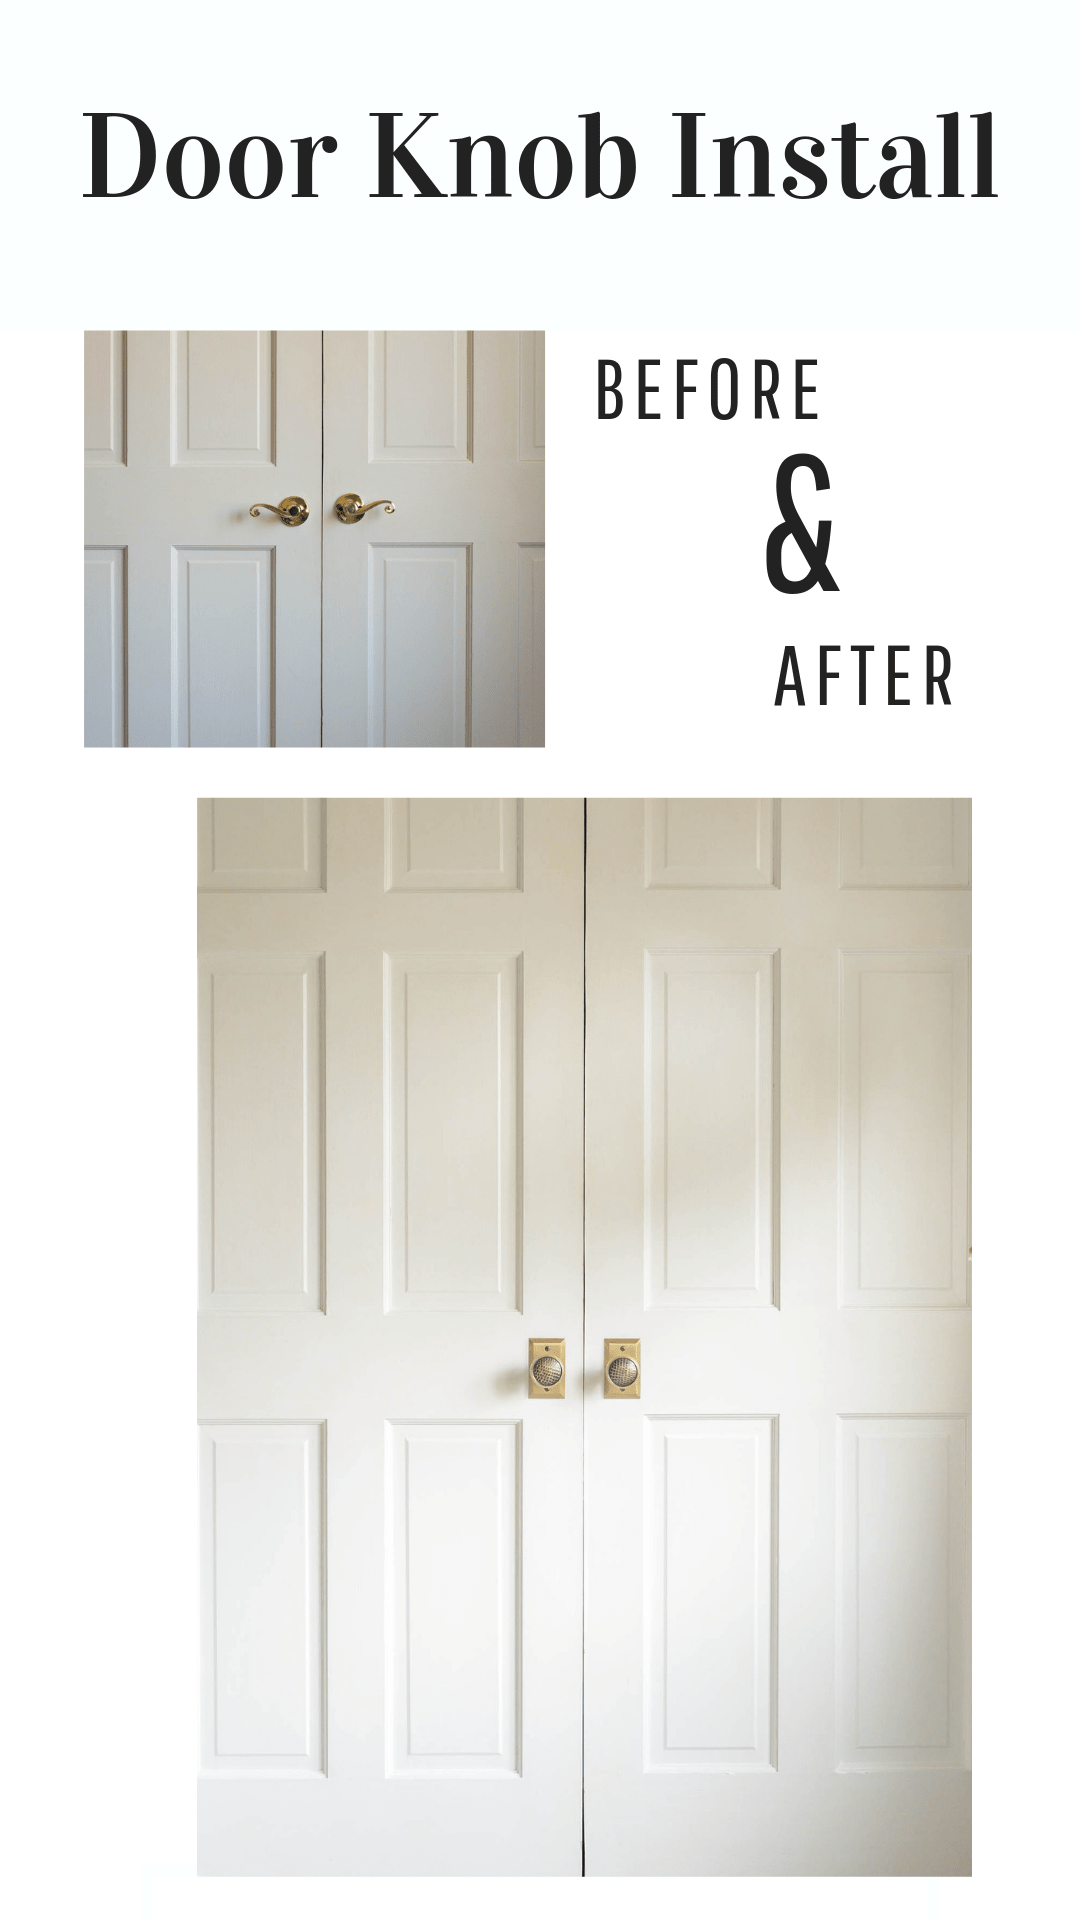 Before and after door knob installation 